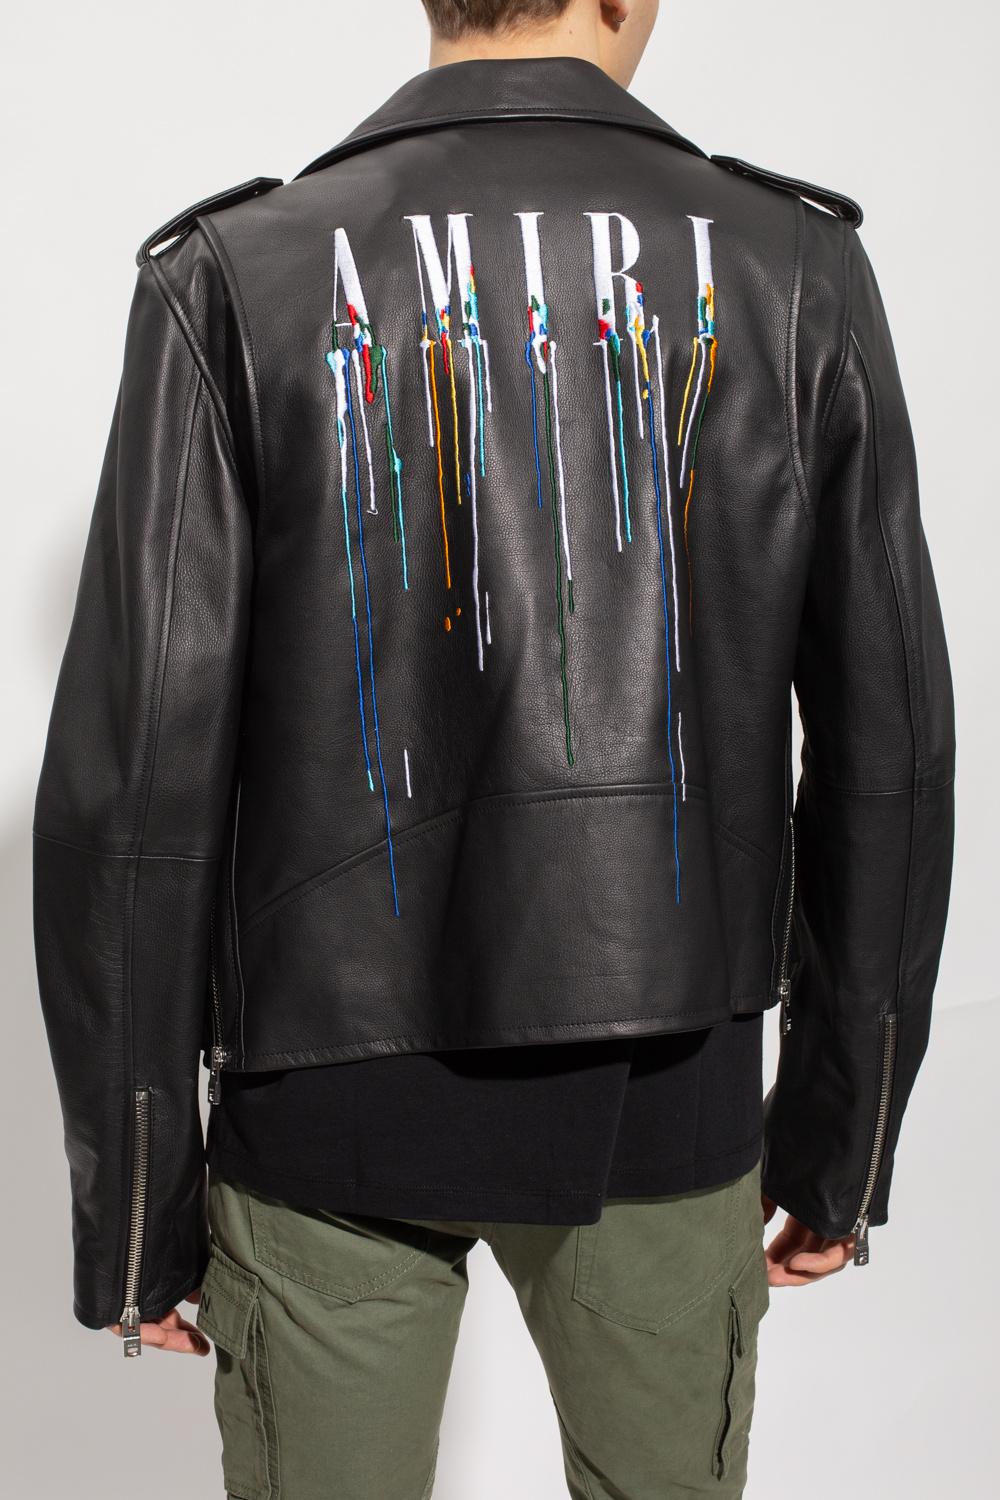 Amiri Leather Jacket With Logo in Black for Men - Lyst